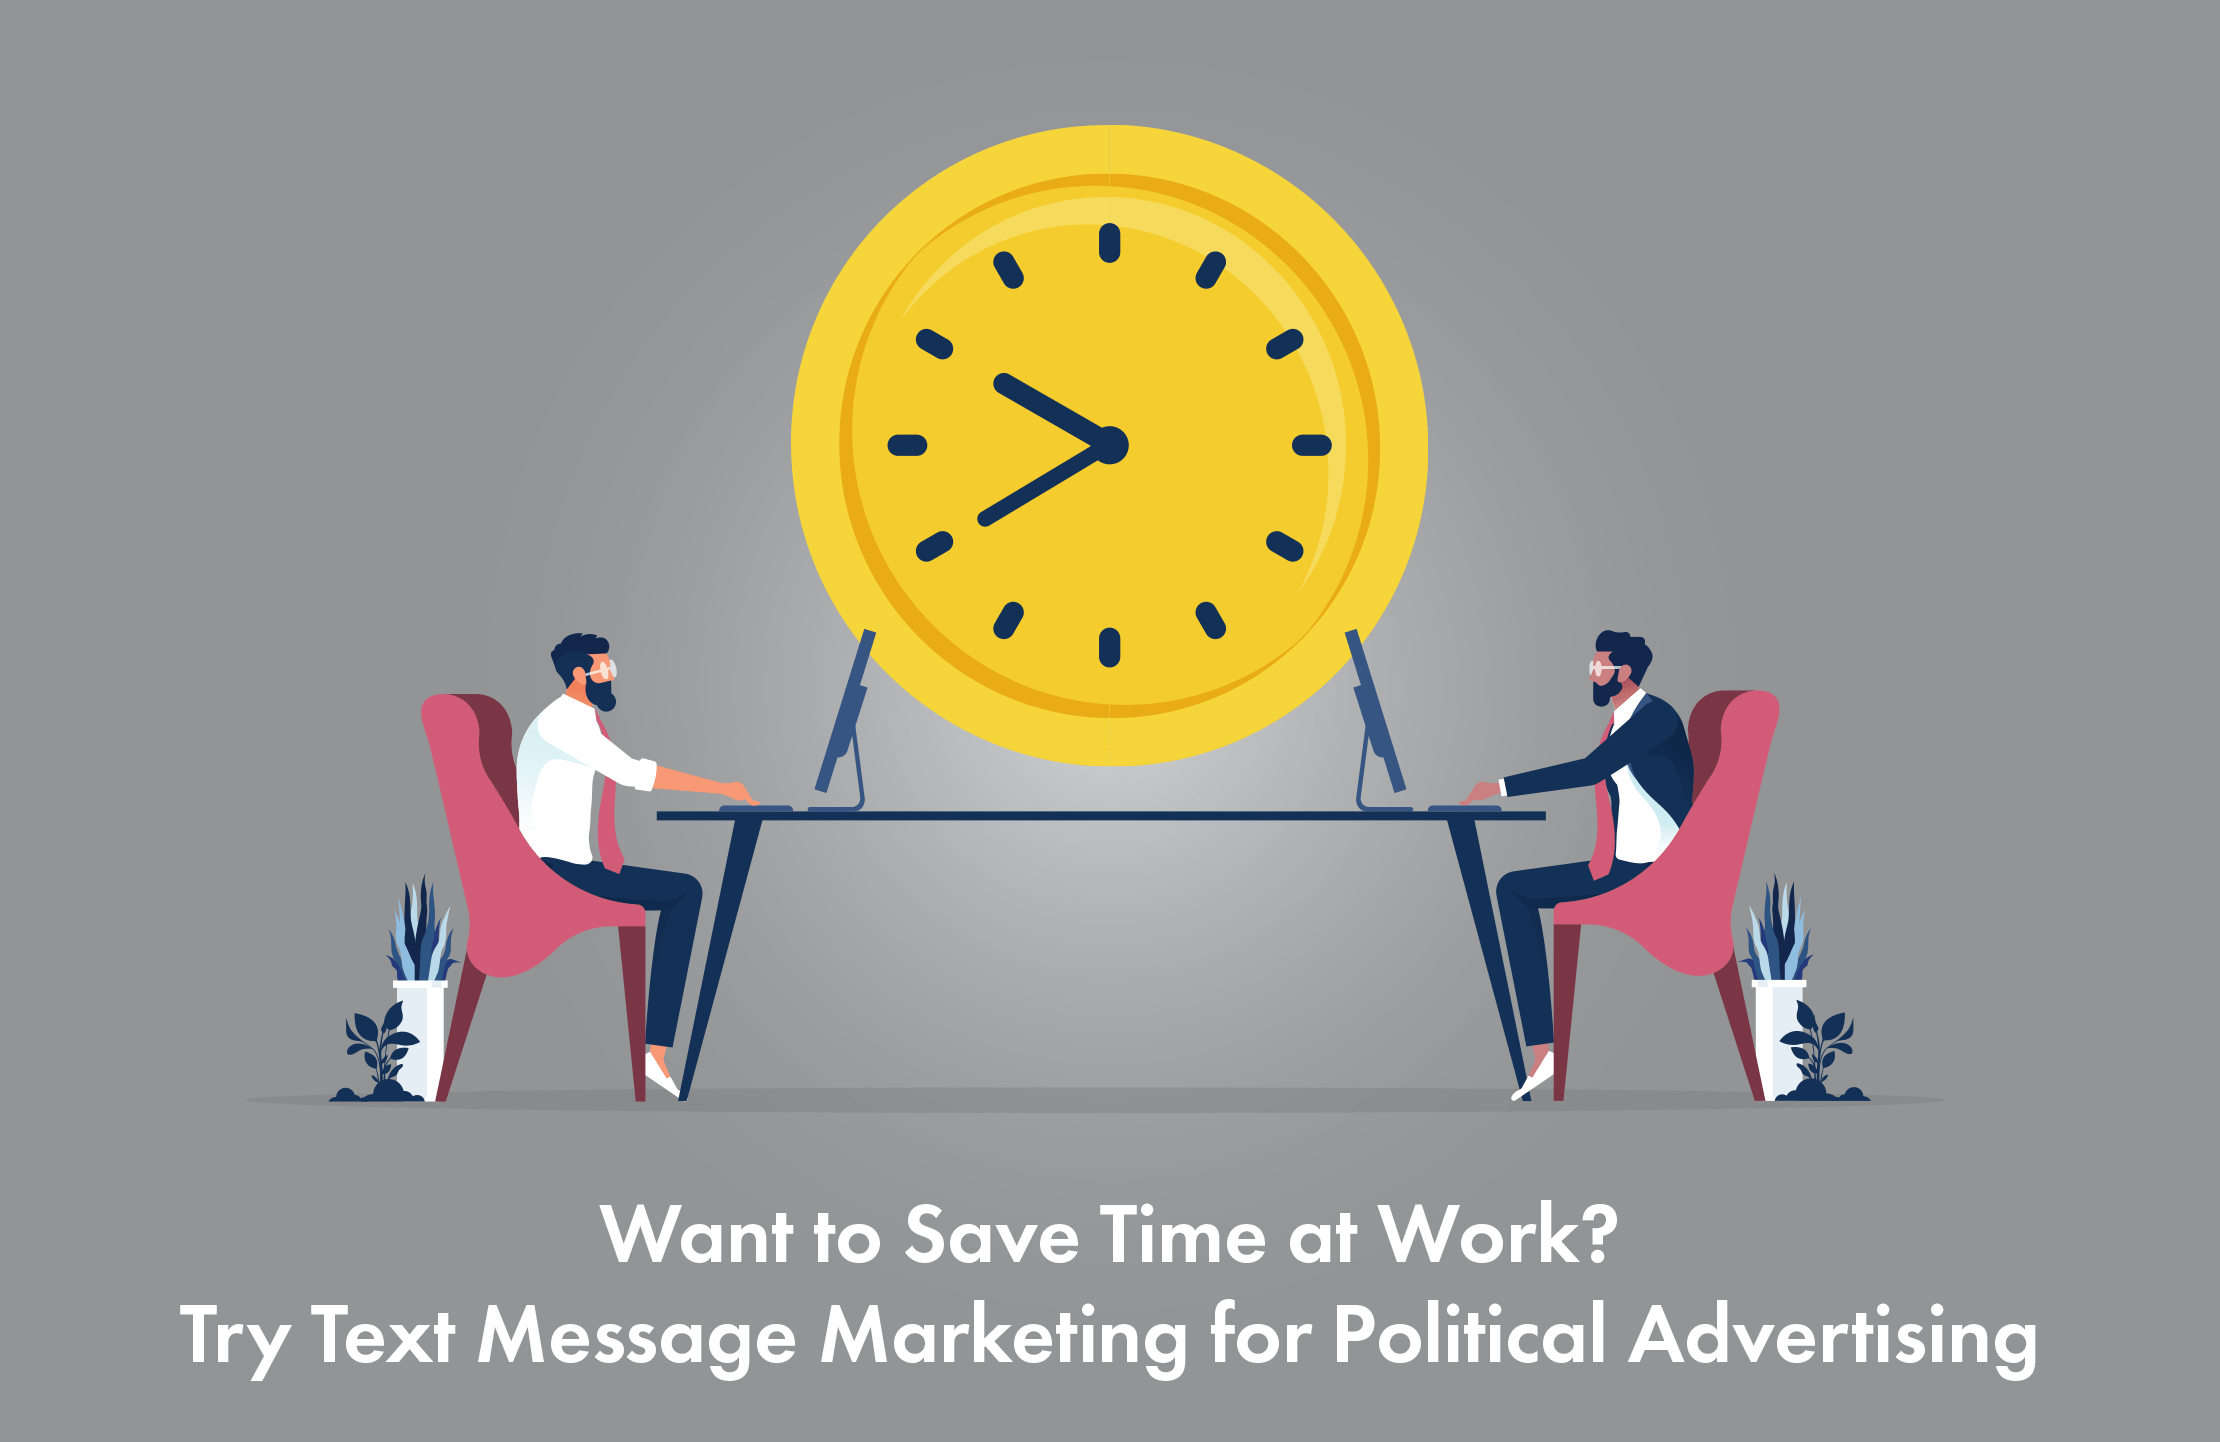 Save Time at Work With Text Message Marketing for Political Advertising